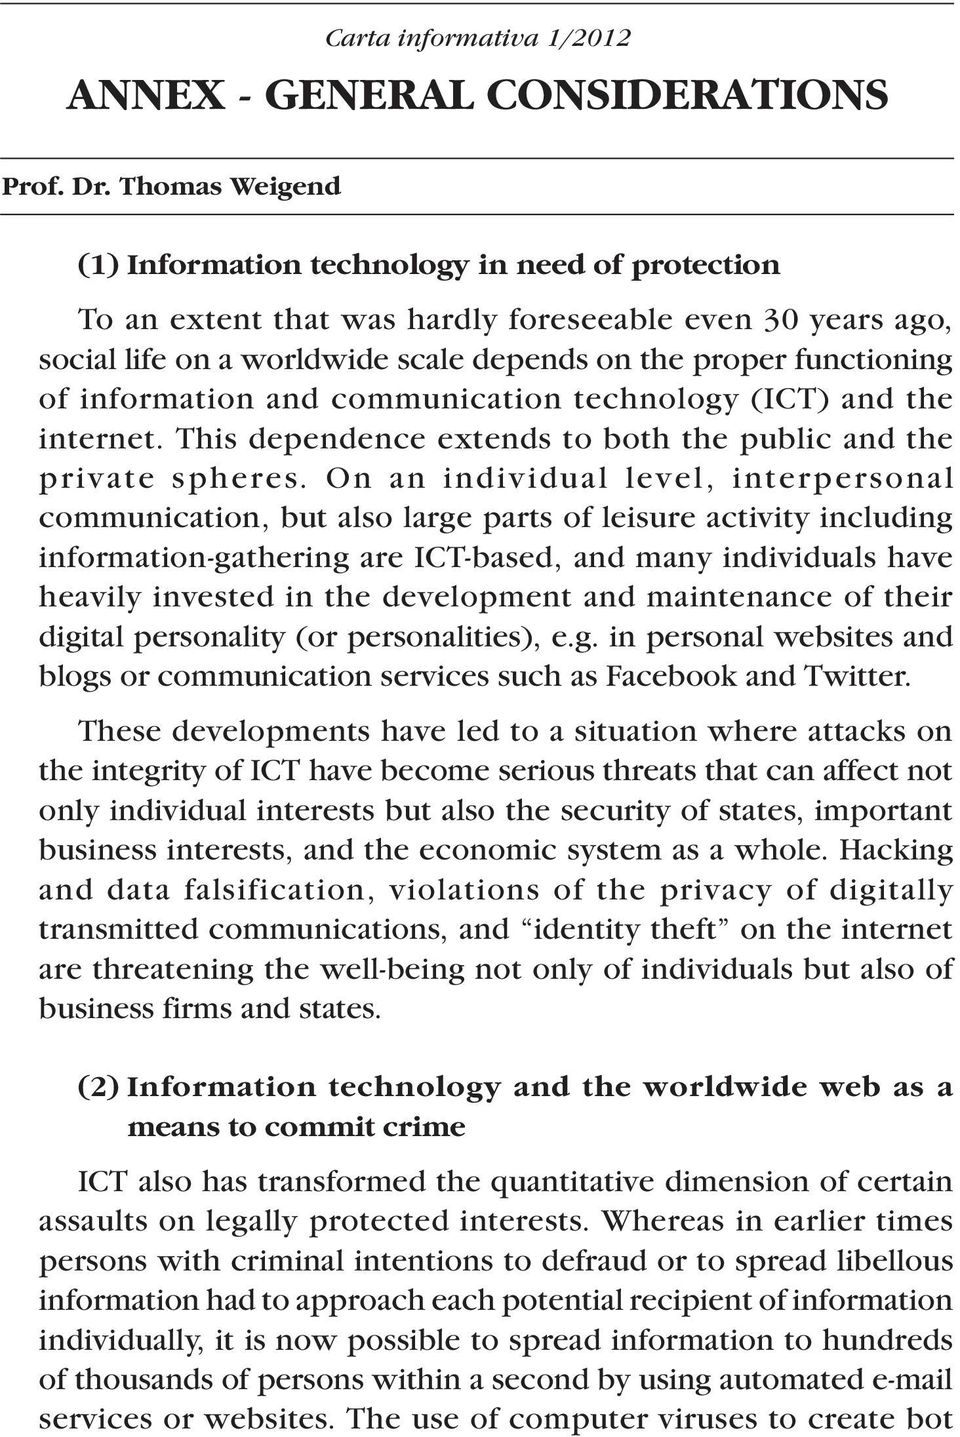 information and communication technology (ICT) and the internet. This dependence extends to both the public and the private spheres.